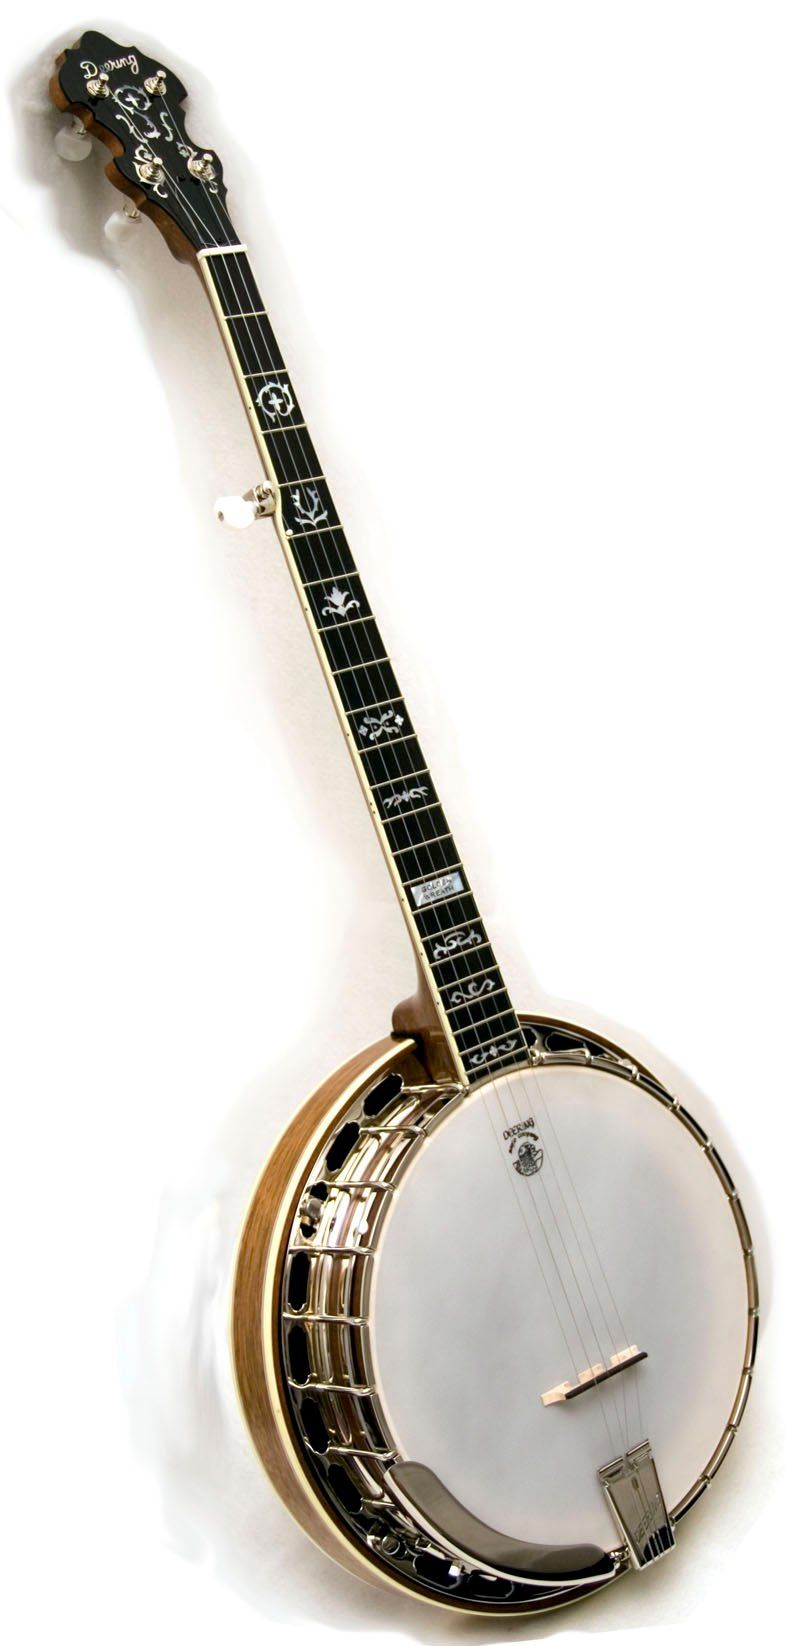 Golden Wreath - Used Banjo For Sale at